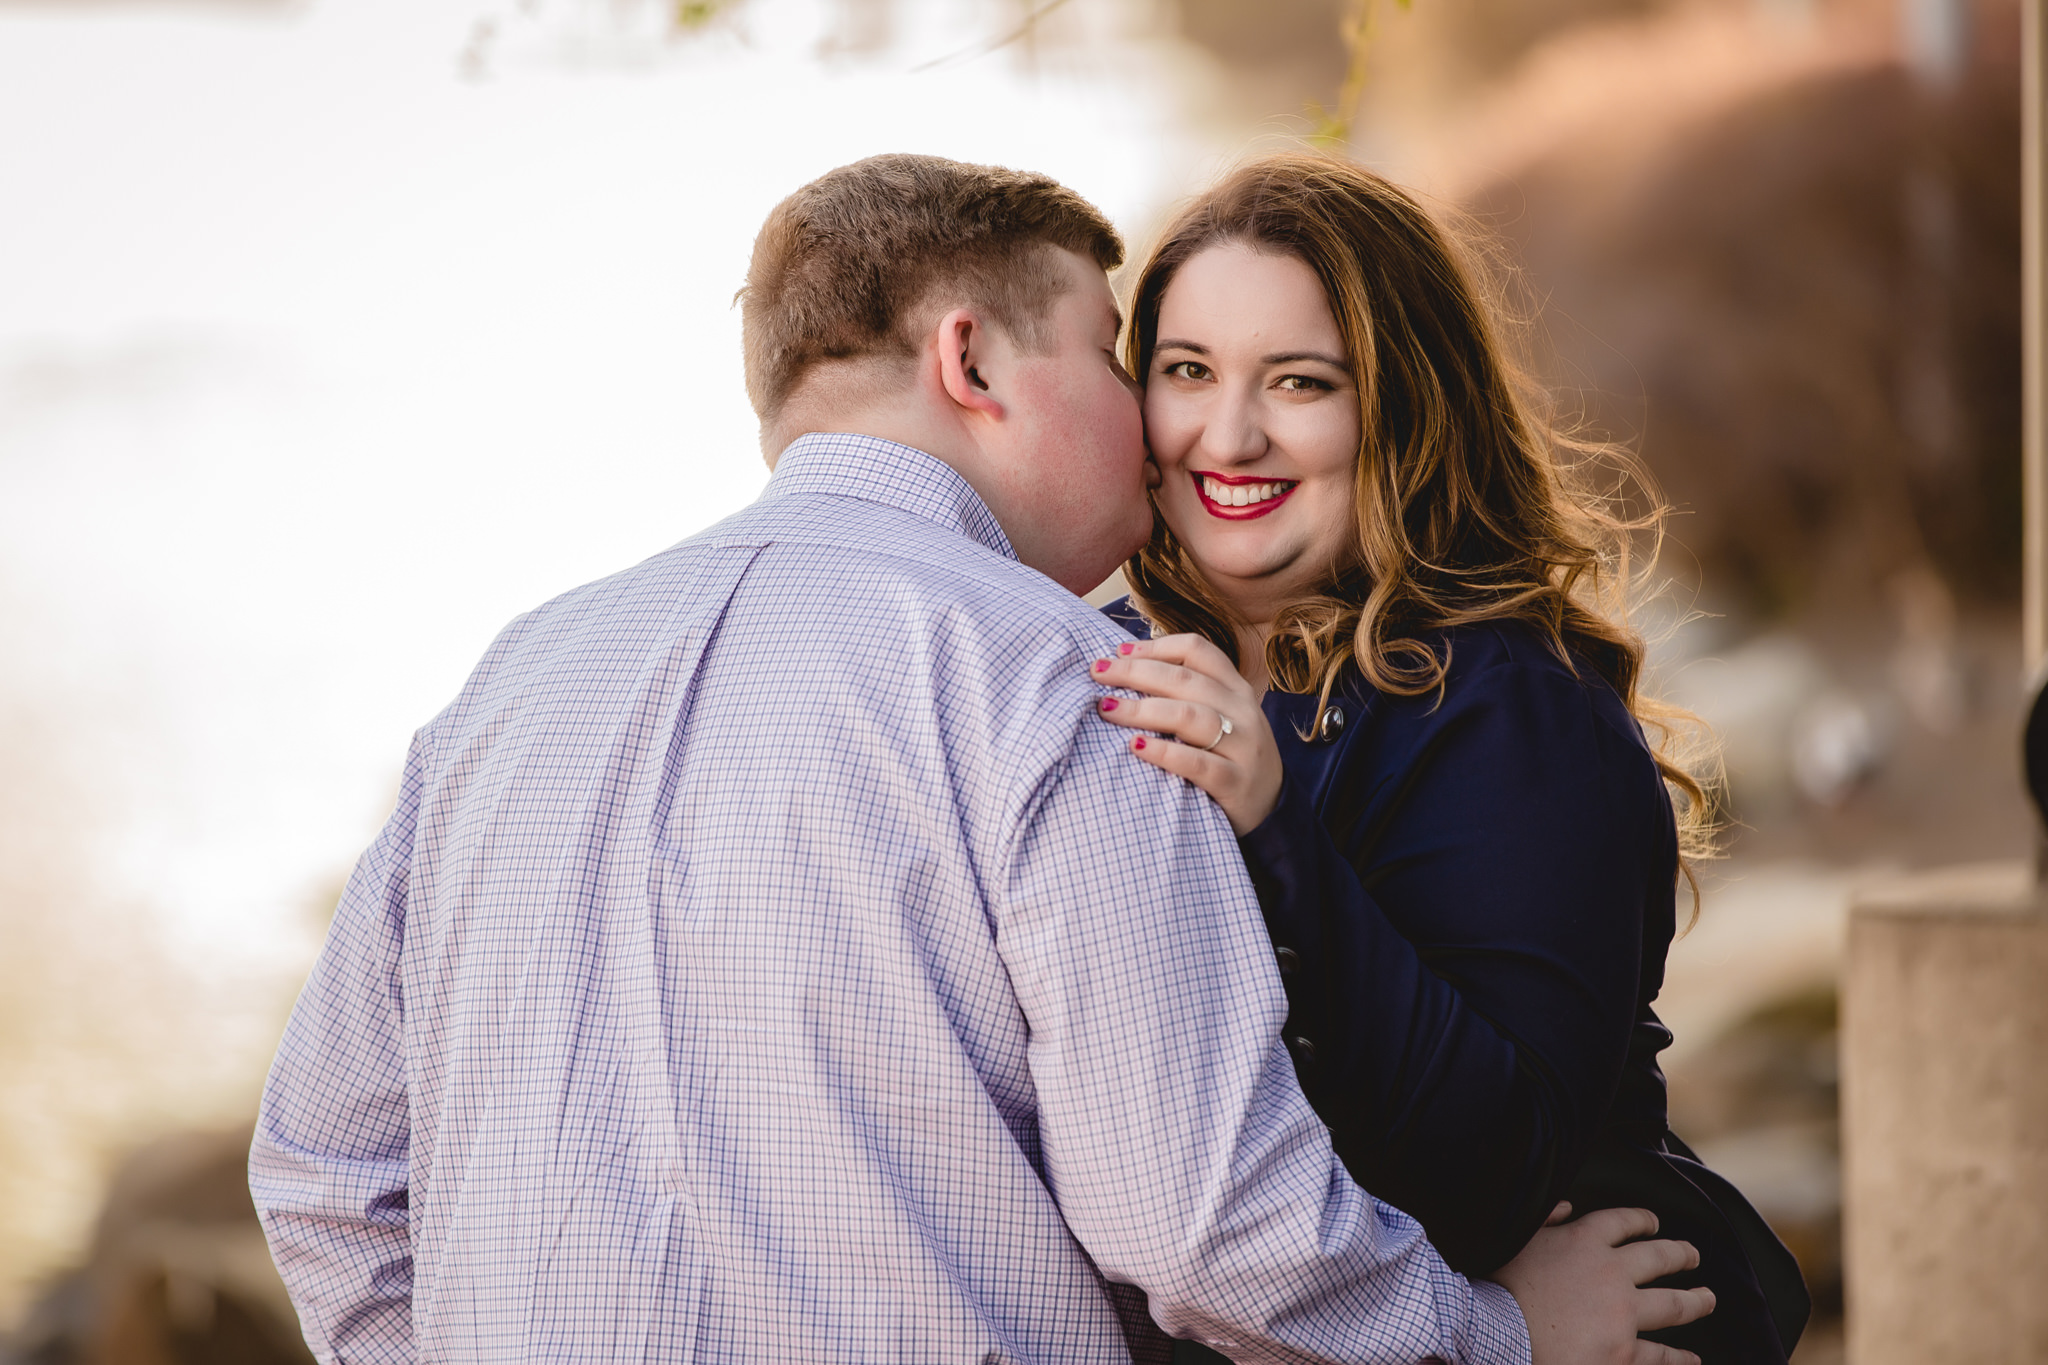 Groom-to-be kisses his fiance during a North Shore engagement session